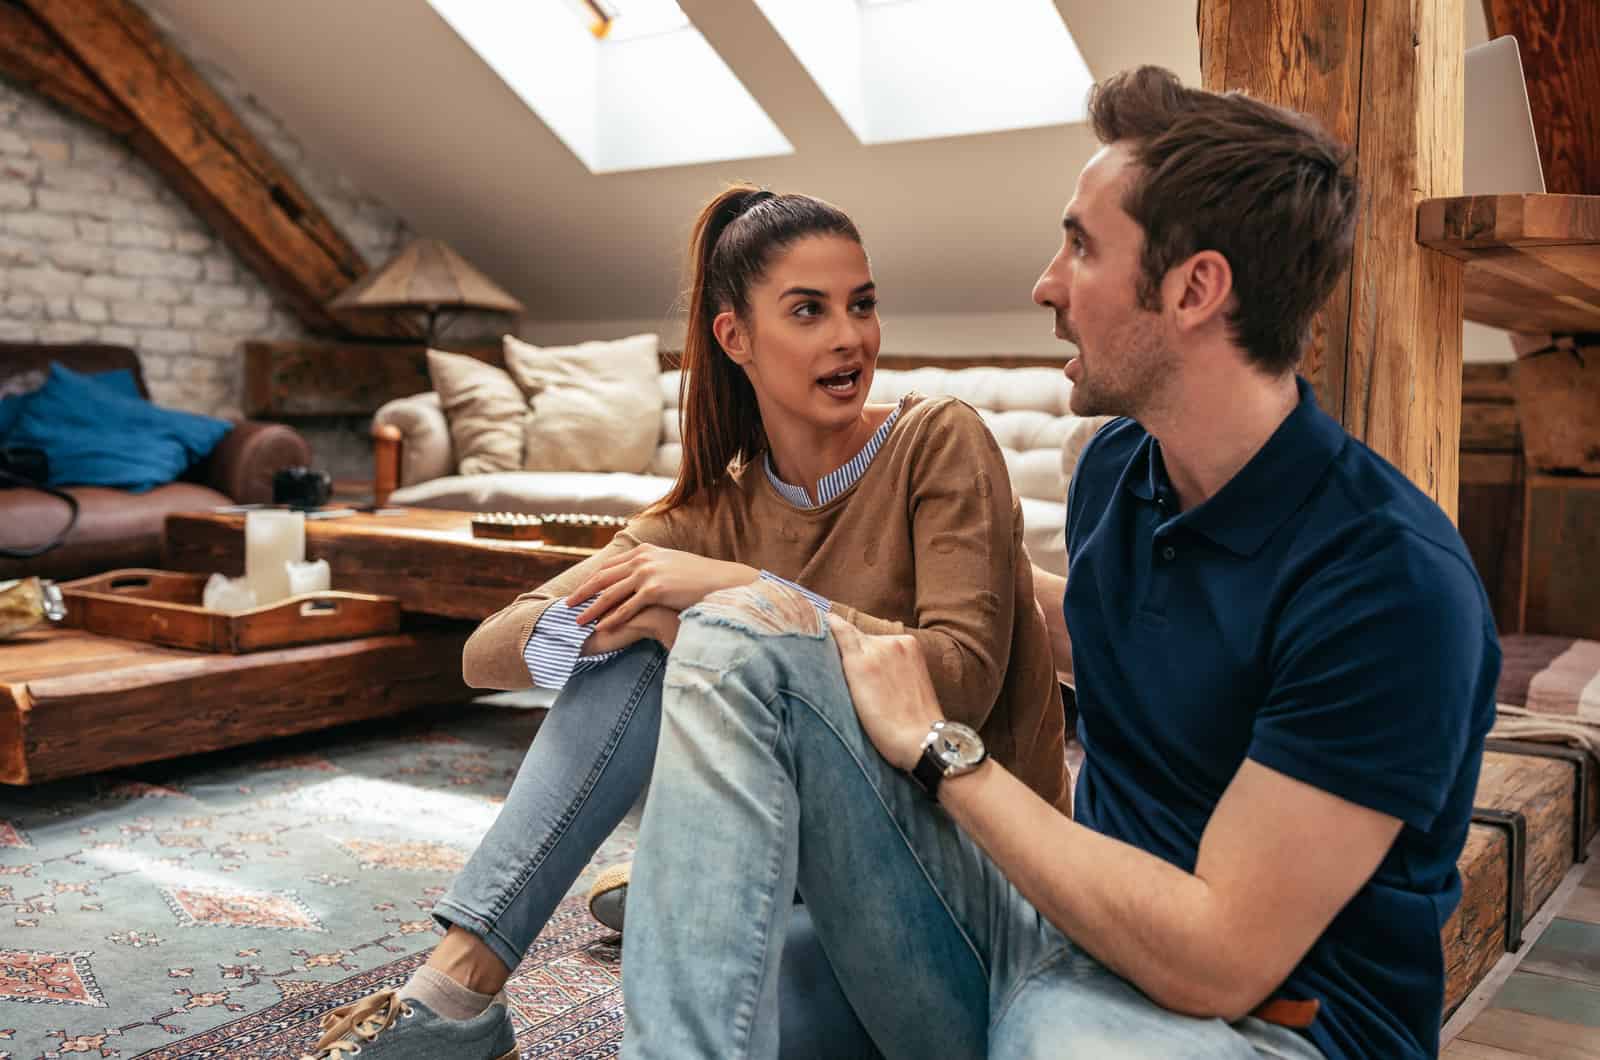 14 Positive Signs During Separation From Your Spouse